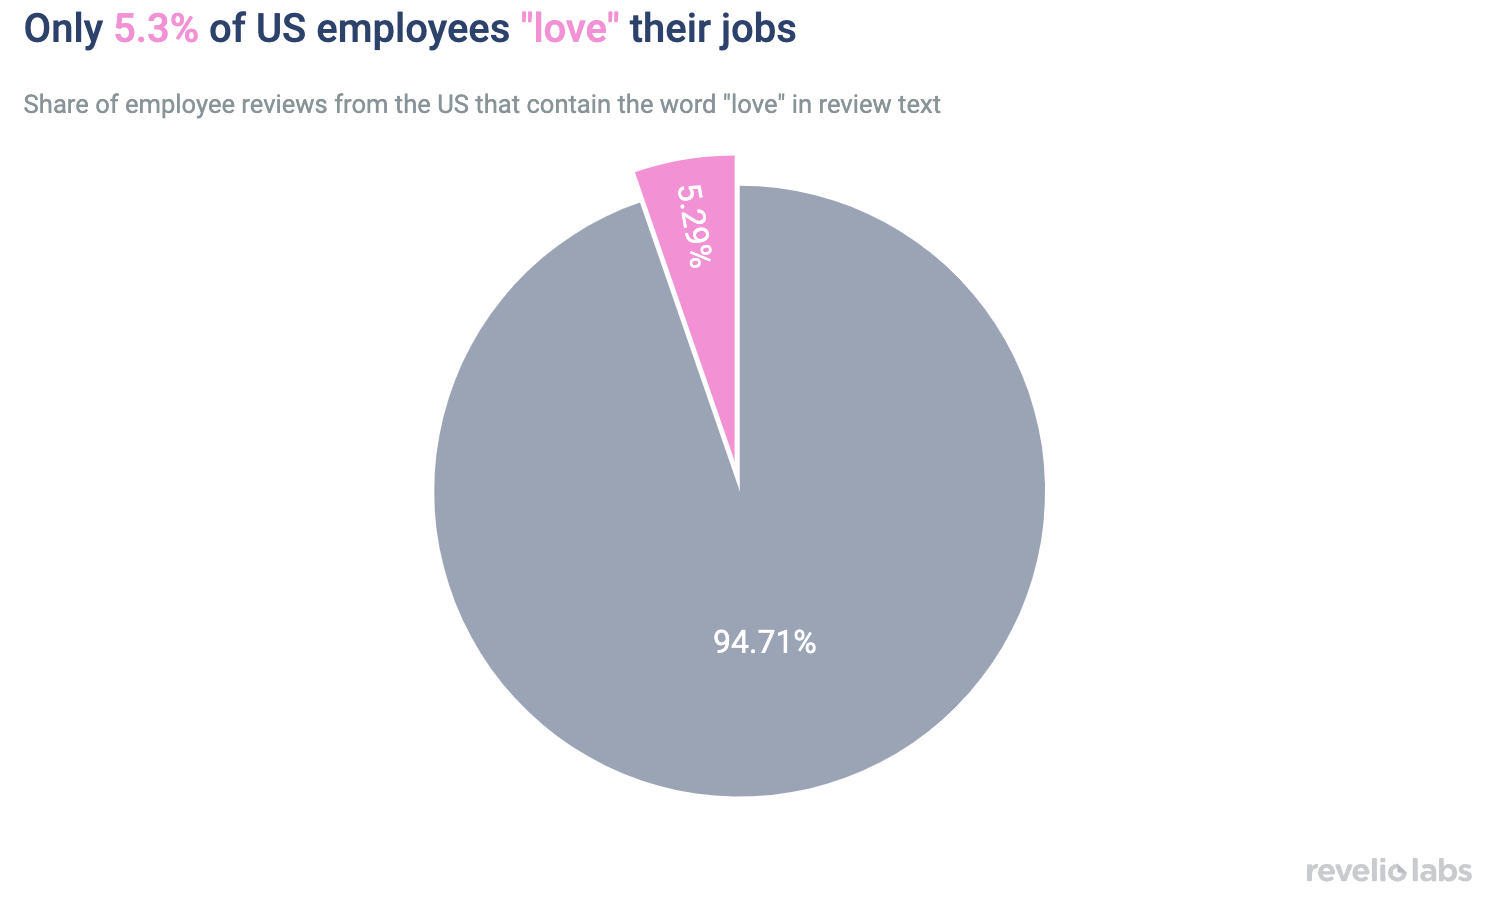 Only 5.3% of US employees "love" their jobs